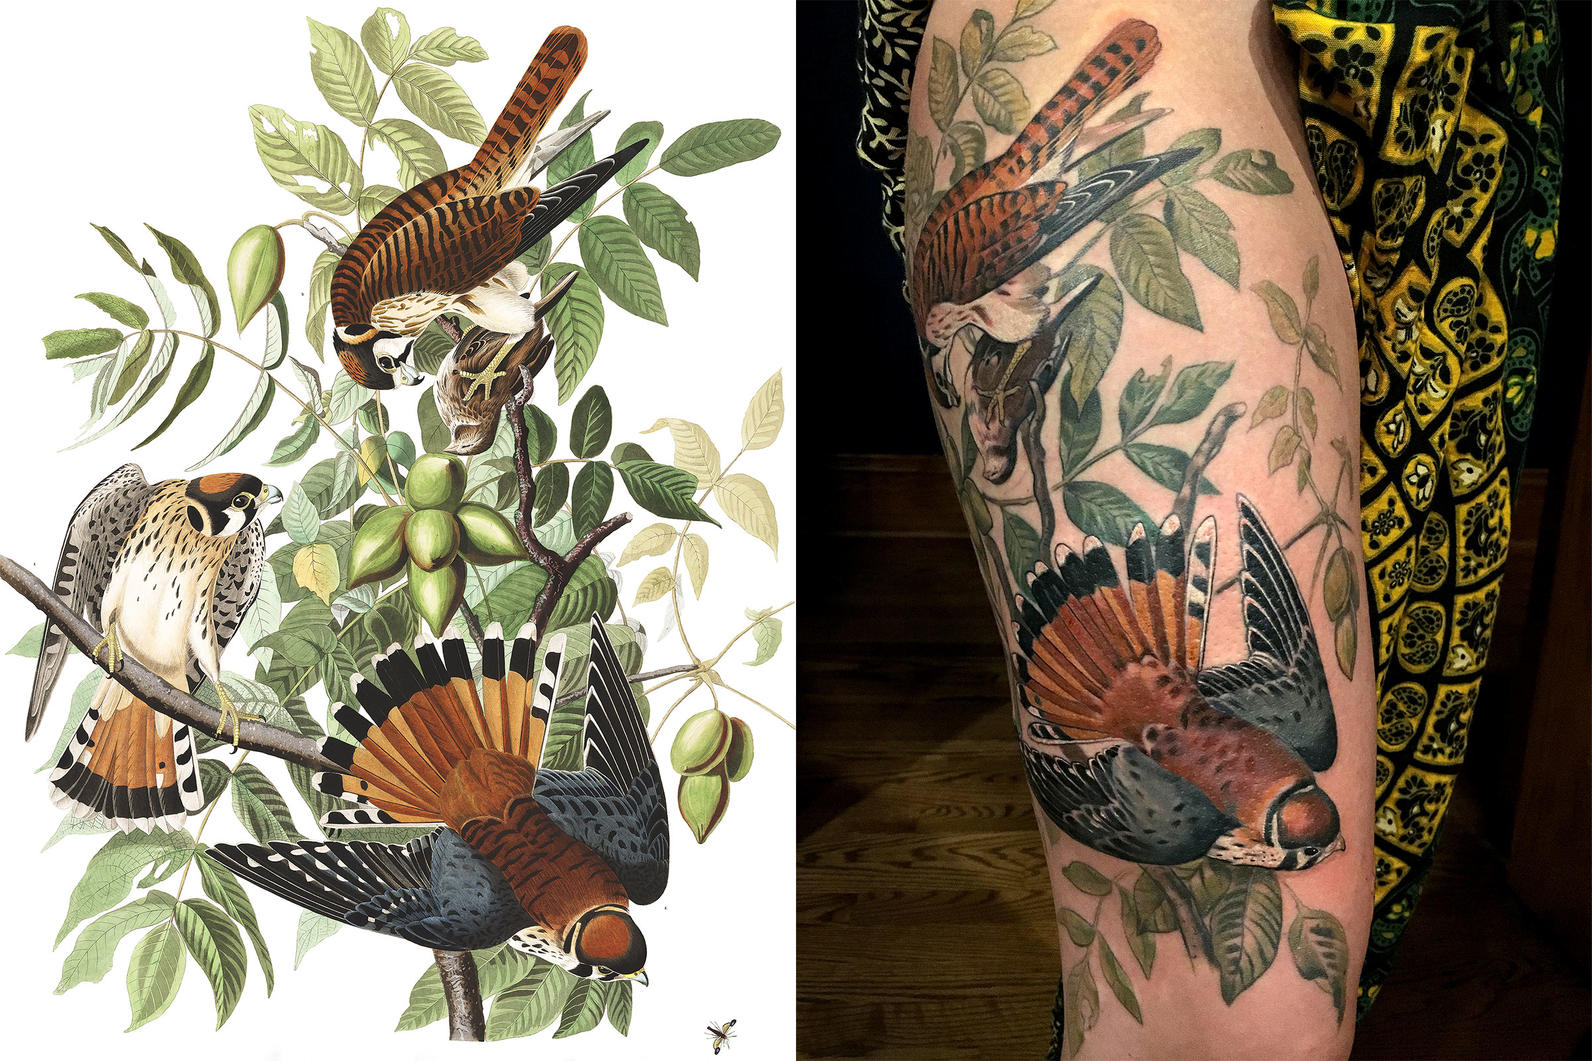 Do bird tattoos have any meaning for men? - Quora